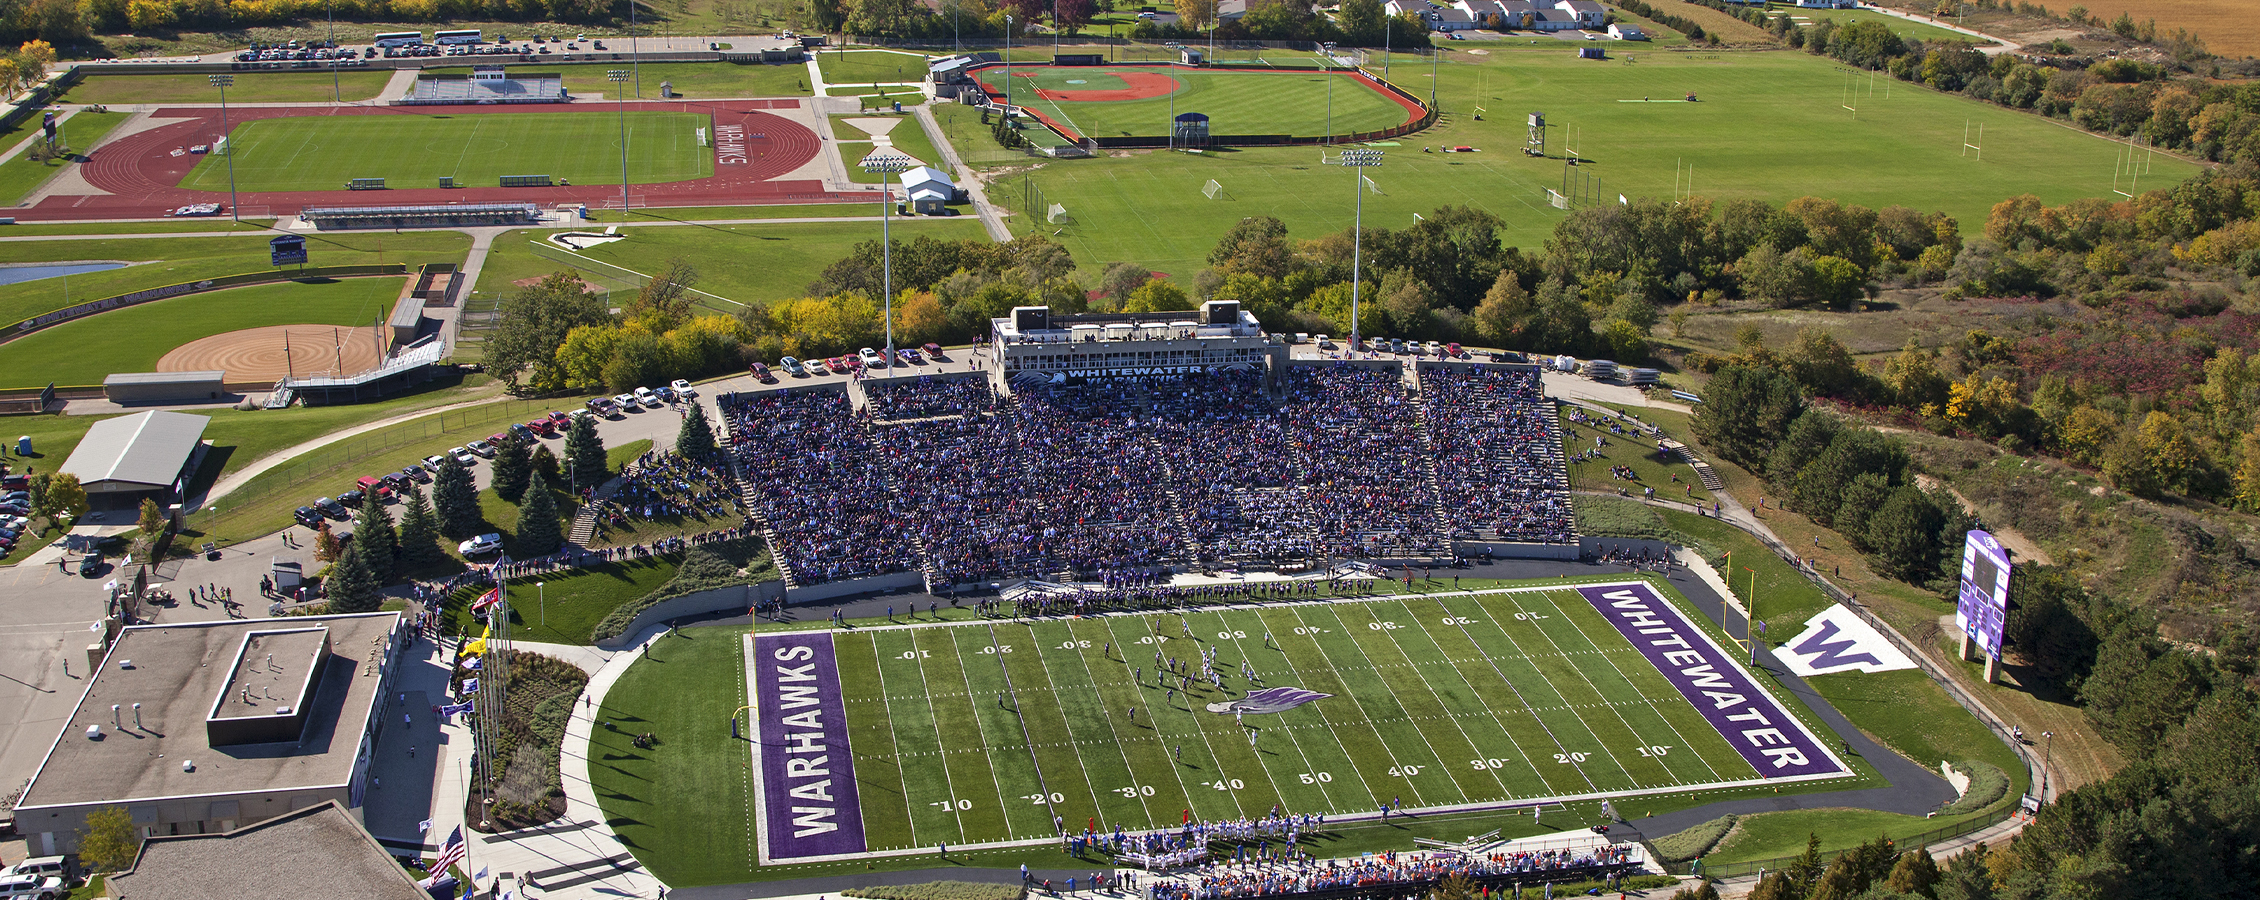 An aerial view of the football stadium, baseball diamond and track area surrounded by large trees.